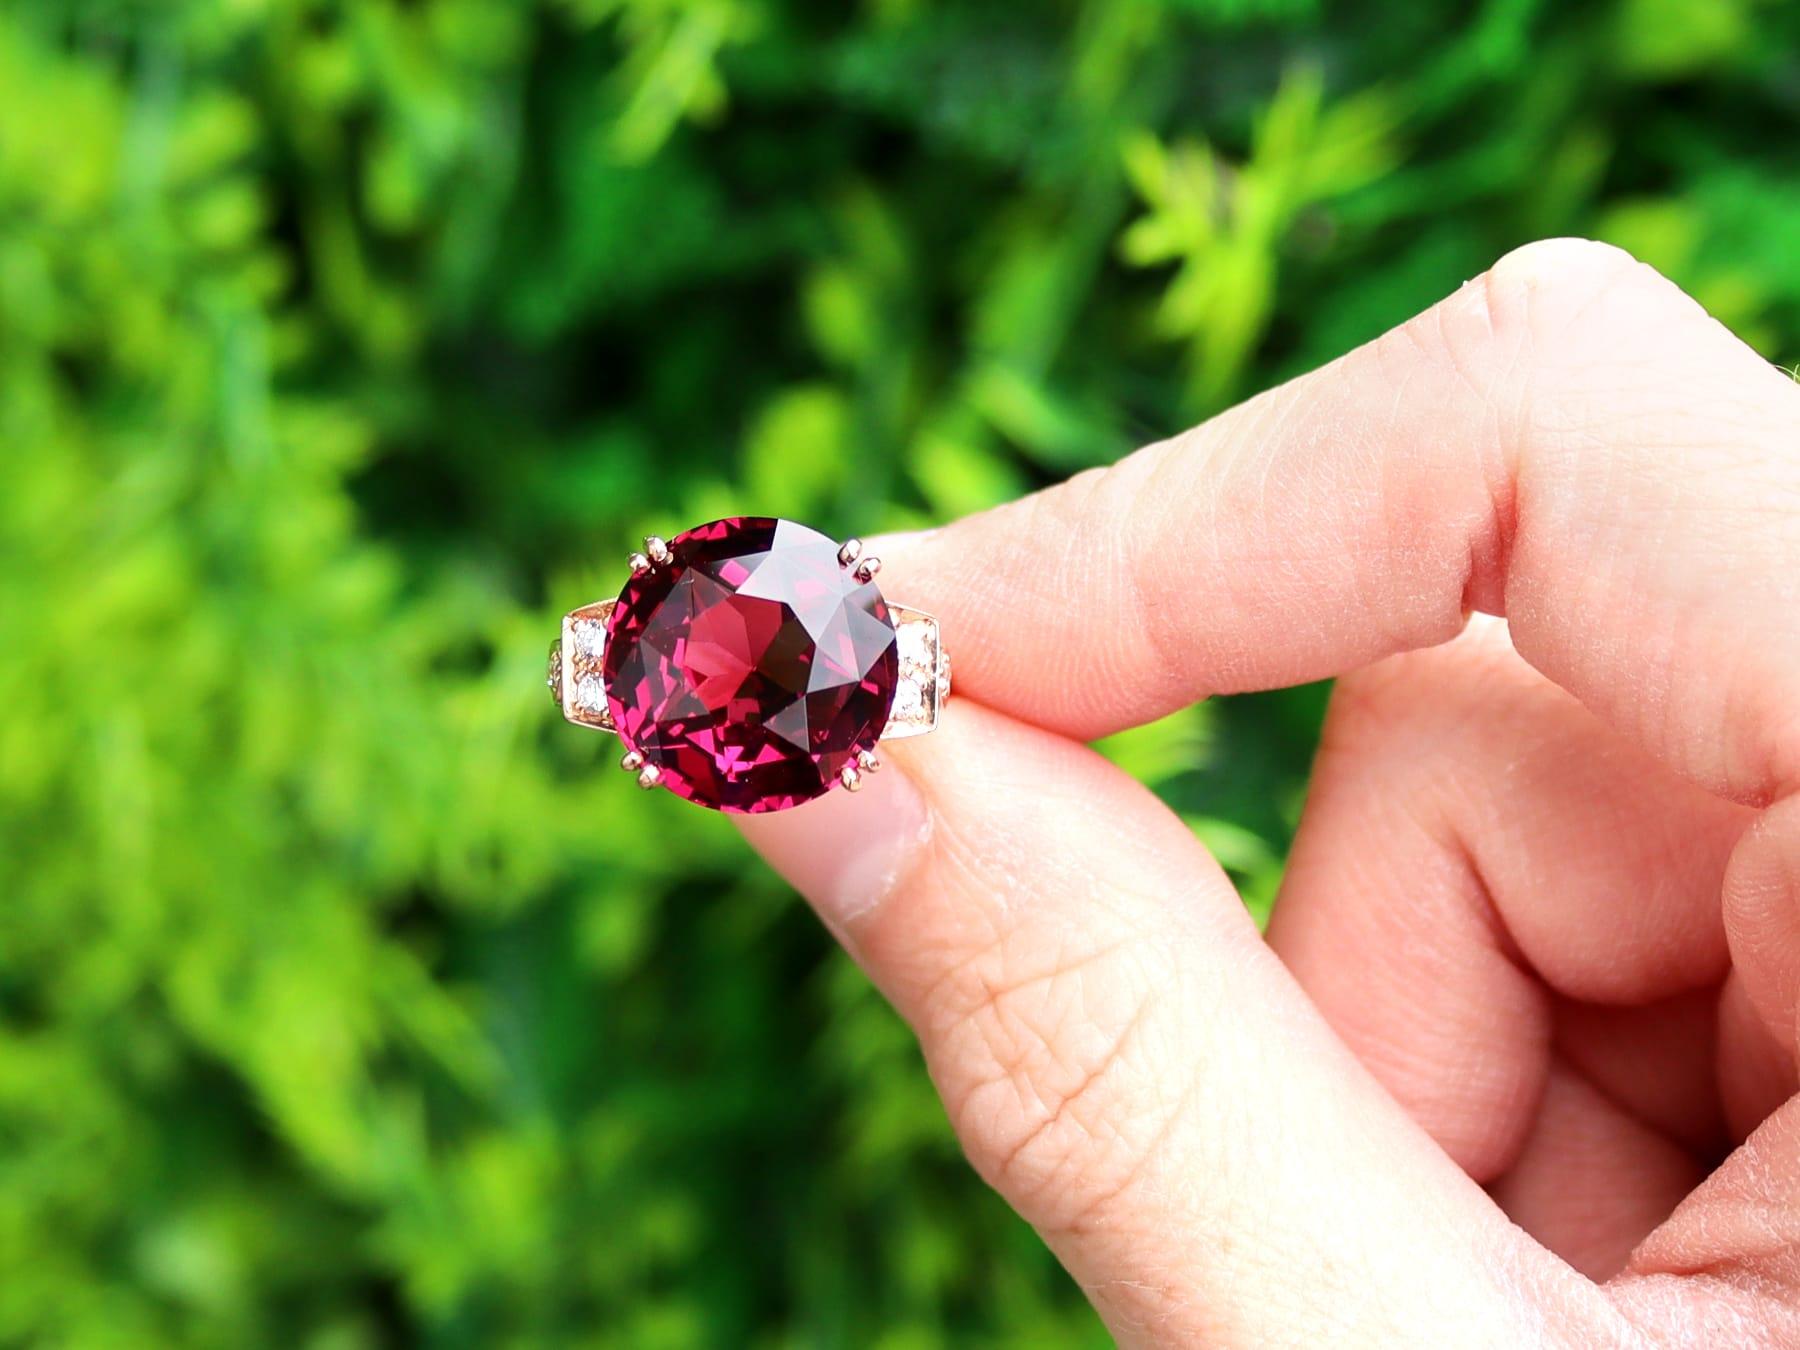 A stunning, fine and impressive 10.5ct rhodolite garnet and 0.20 carat diamond, 18k Rose Gold Dress Ring; part of our diverse gemstone ring collections.

This stunning, fine and impressive antique gemstone ring has been crafted in 18k rose